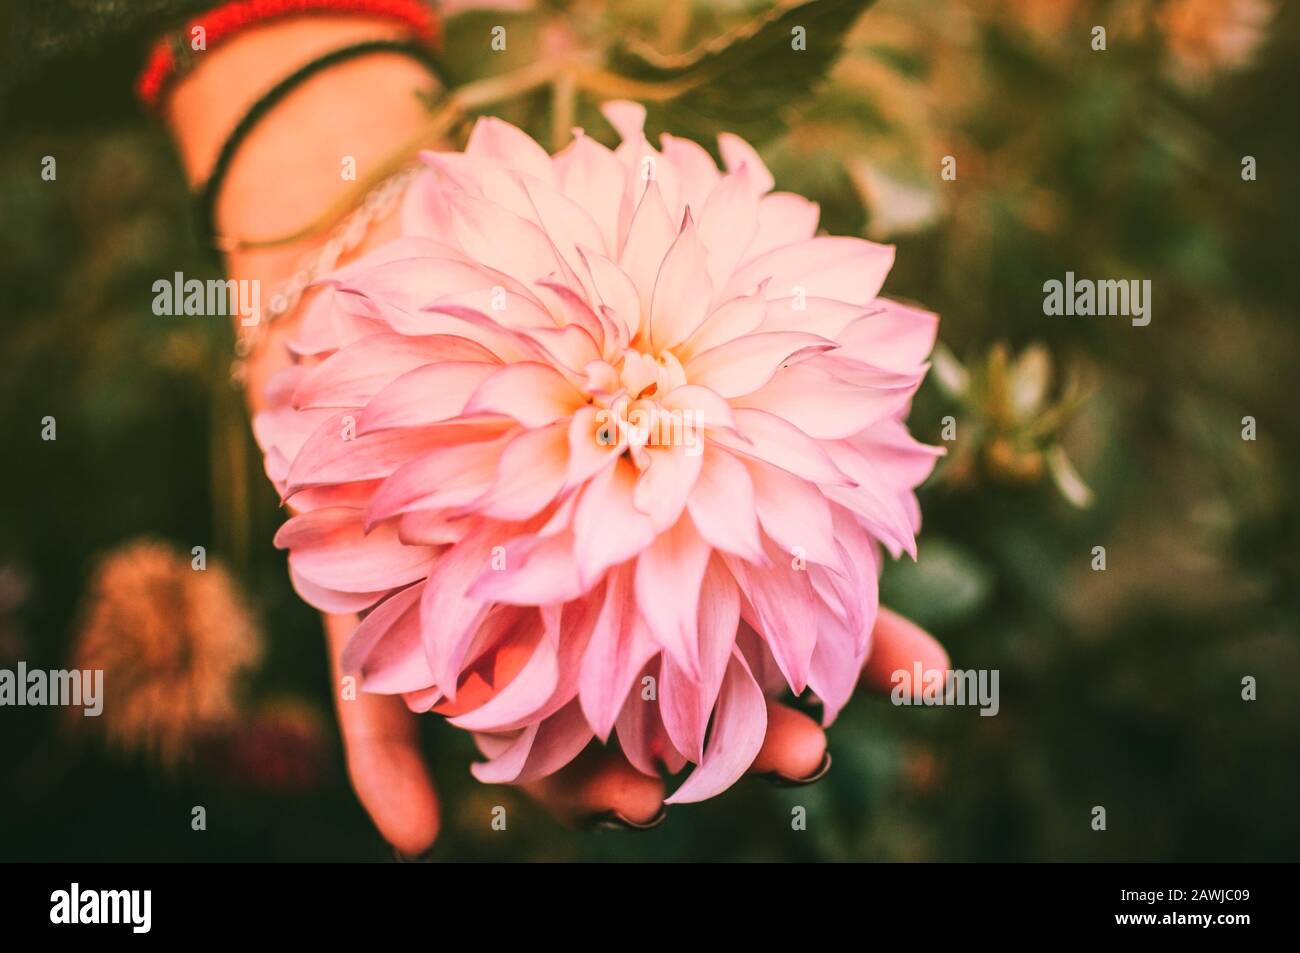 Background of pink chrysanthemum flower in the autumn garden. Girl's hand supports a flower bud. Holiday concept. Stock Photo